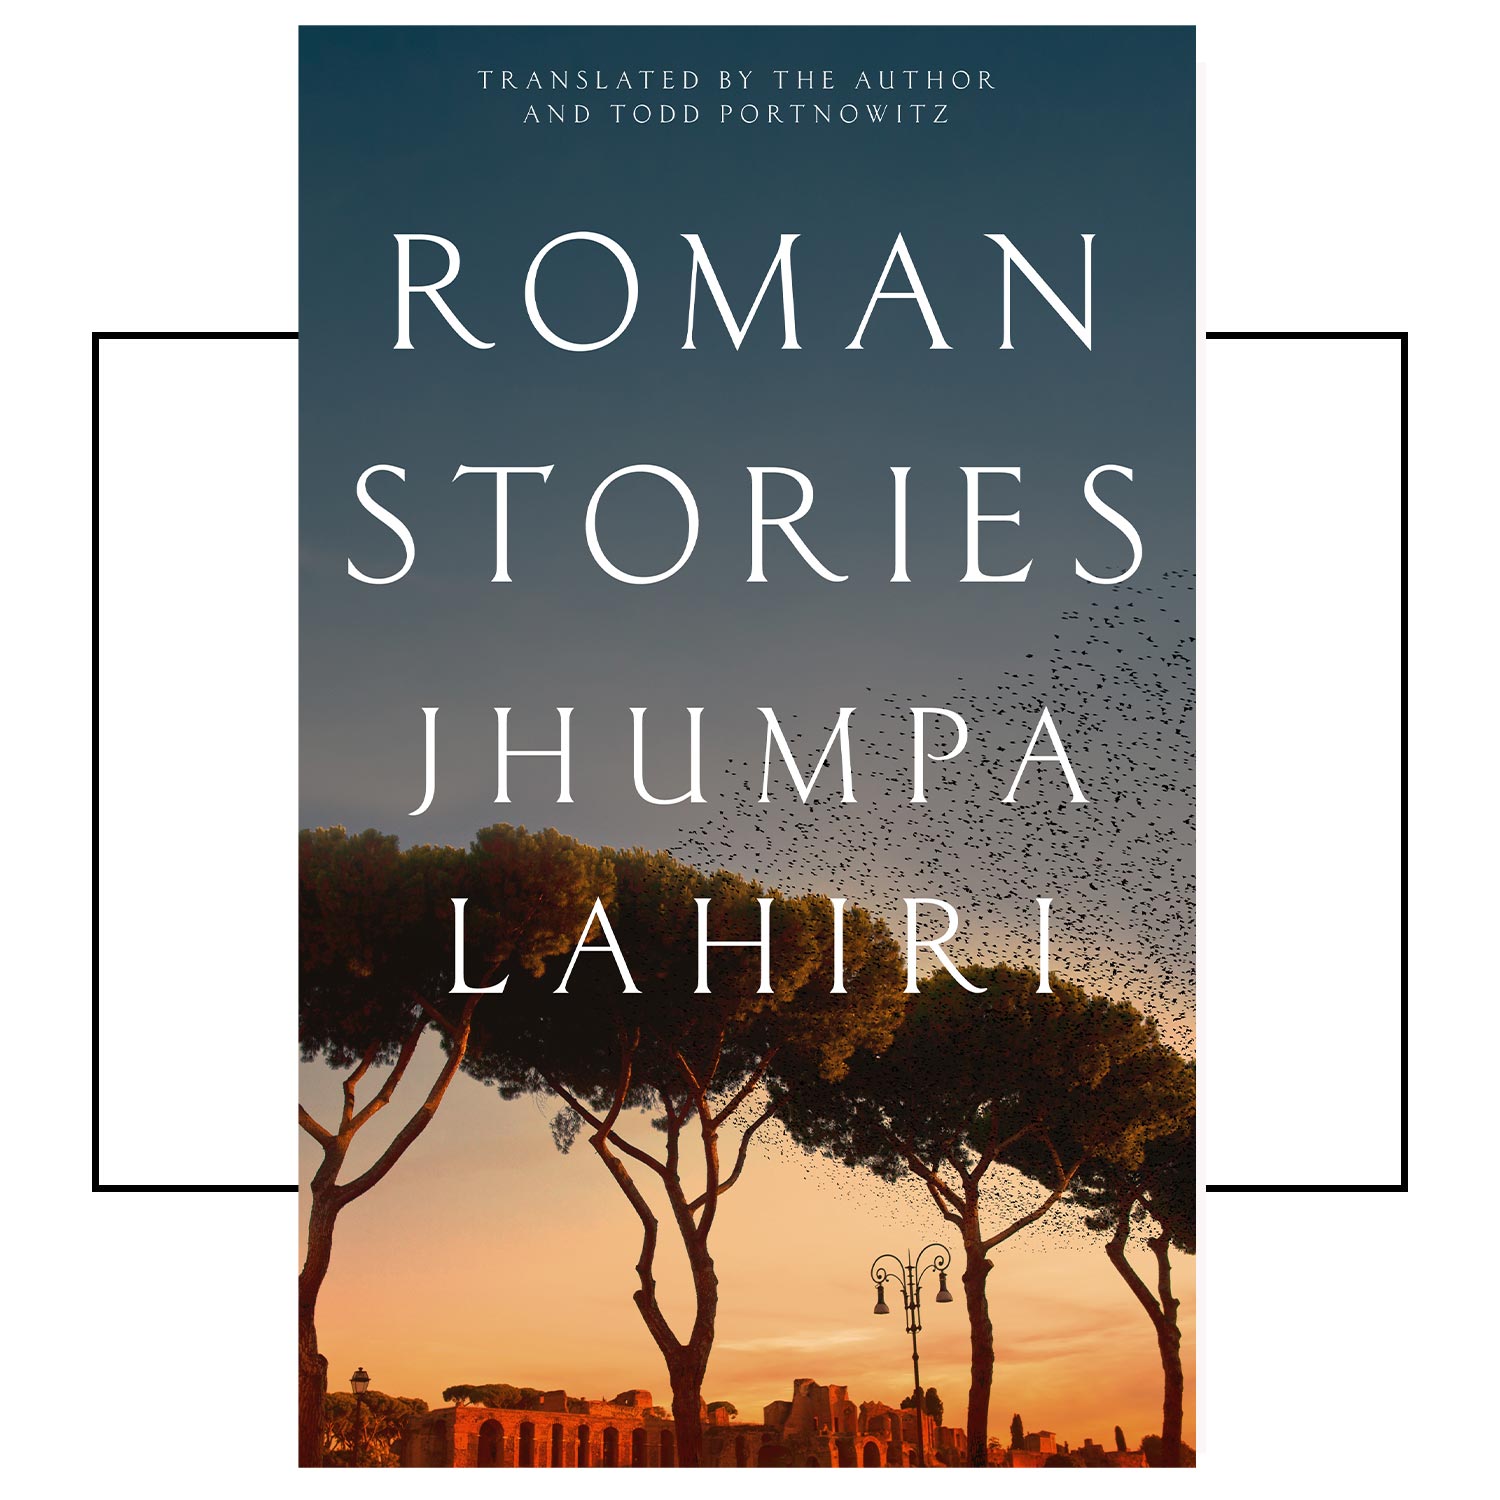  Roman Stories, Jhumpa Lahirimakes the Marie Claire Best books of 2023 list